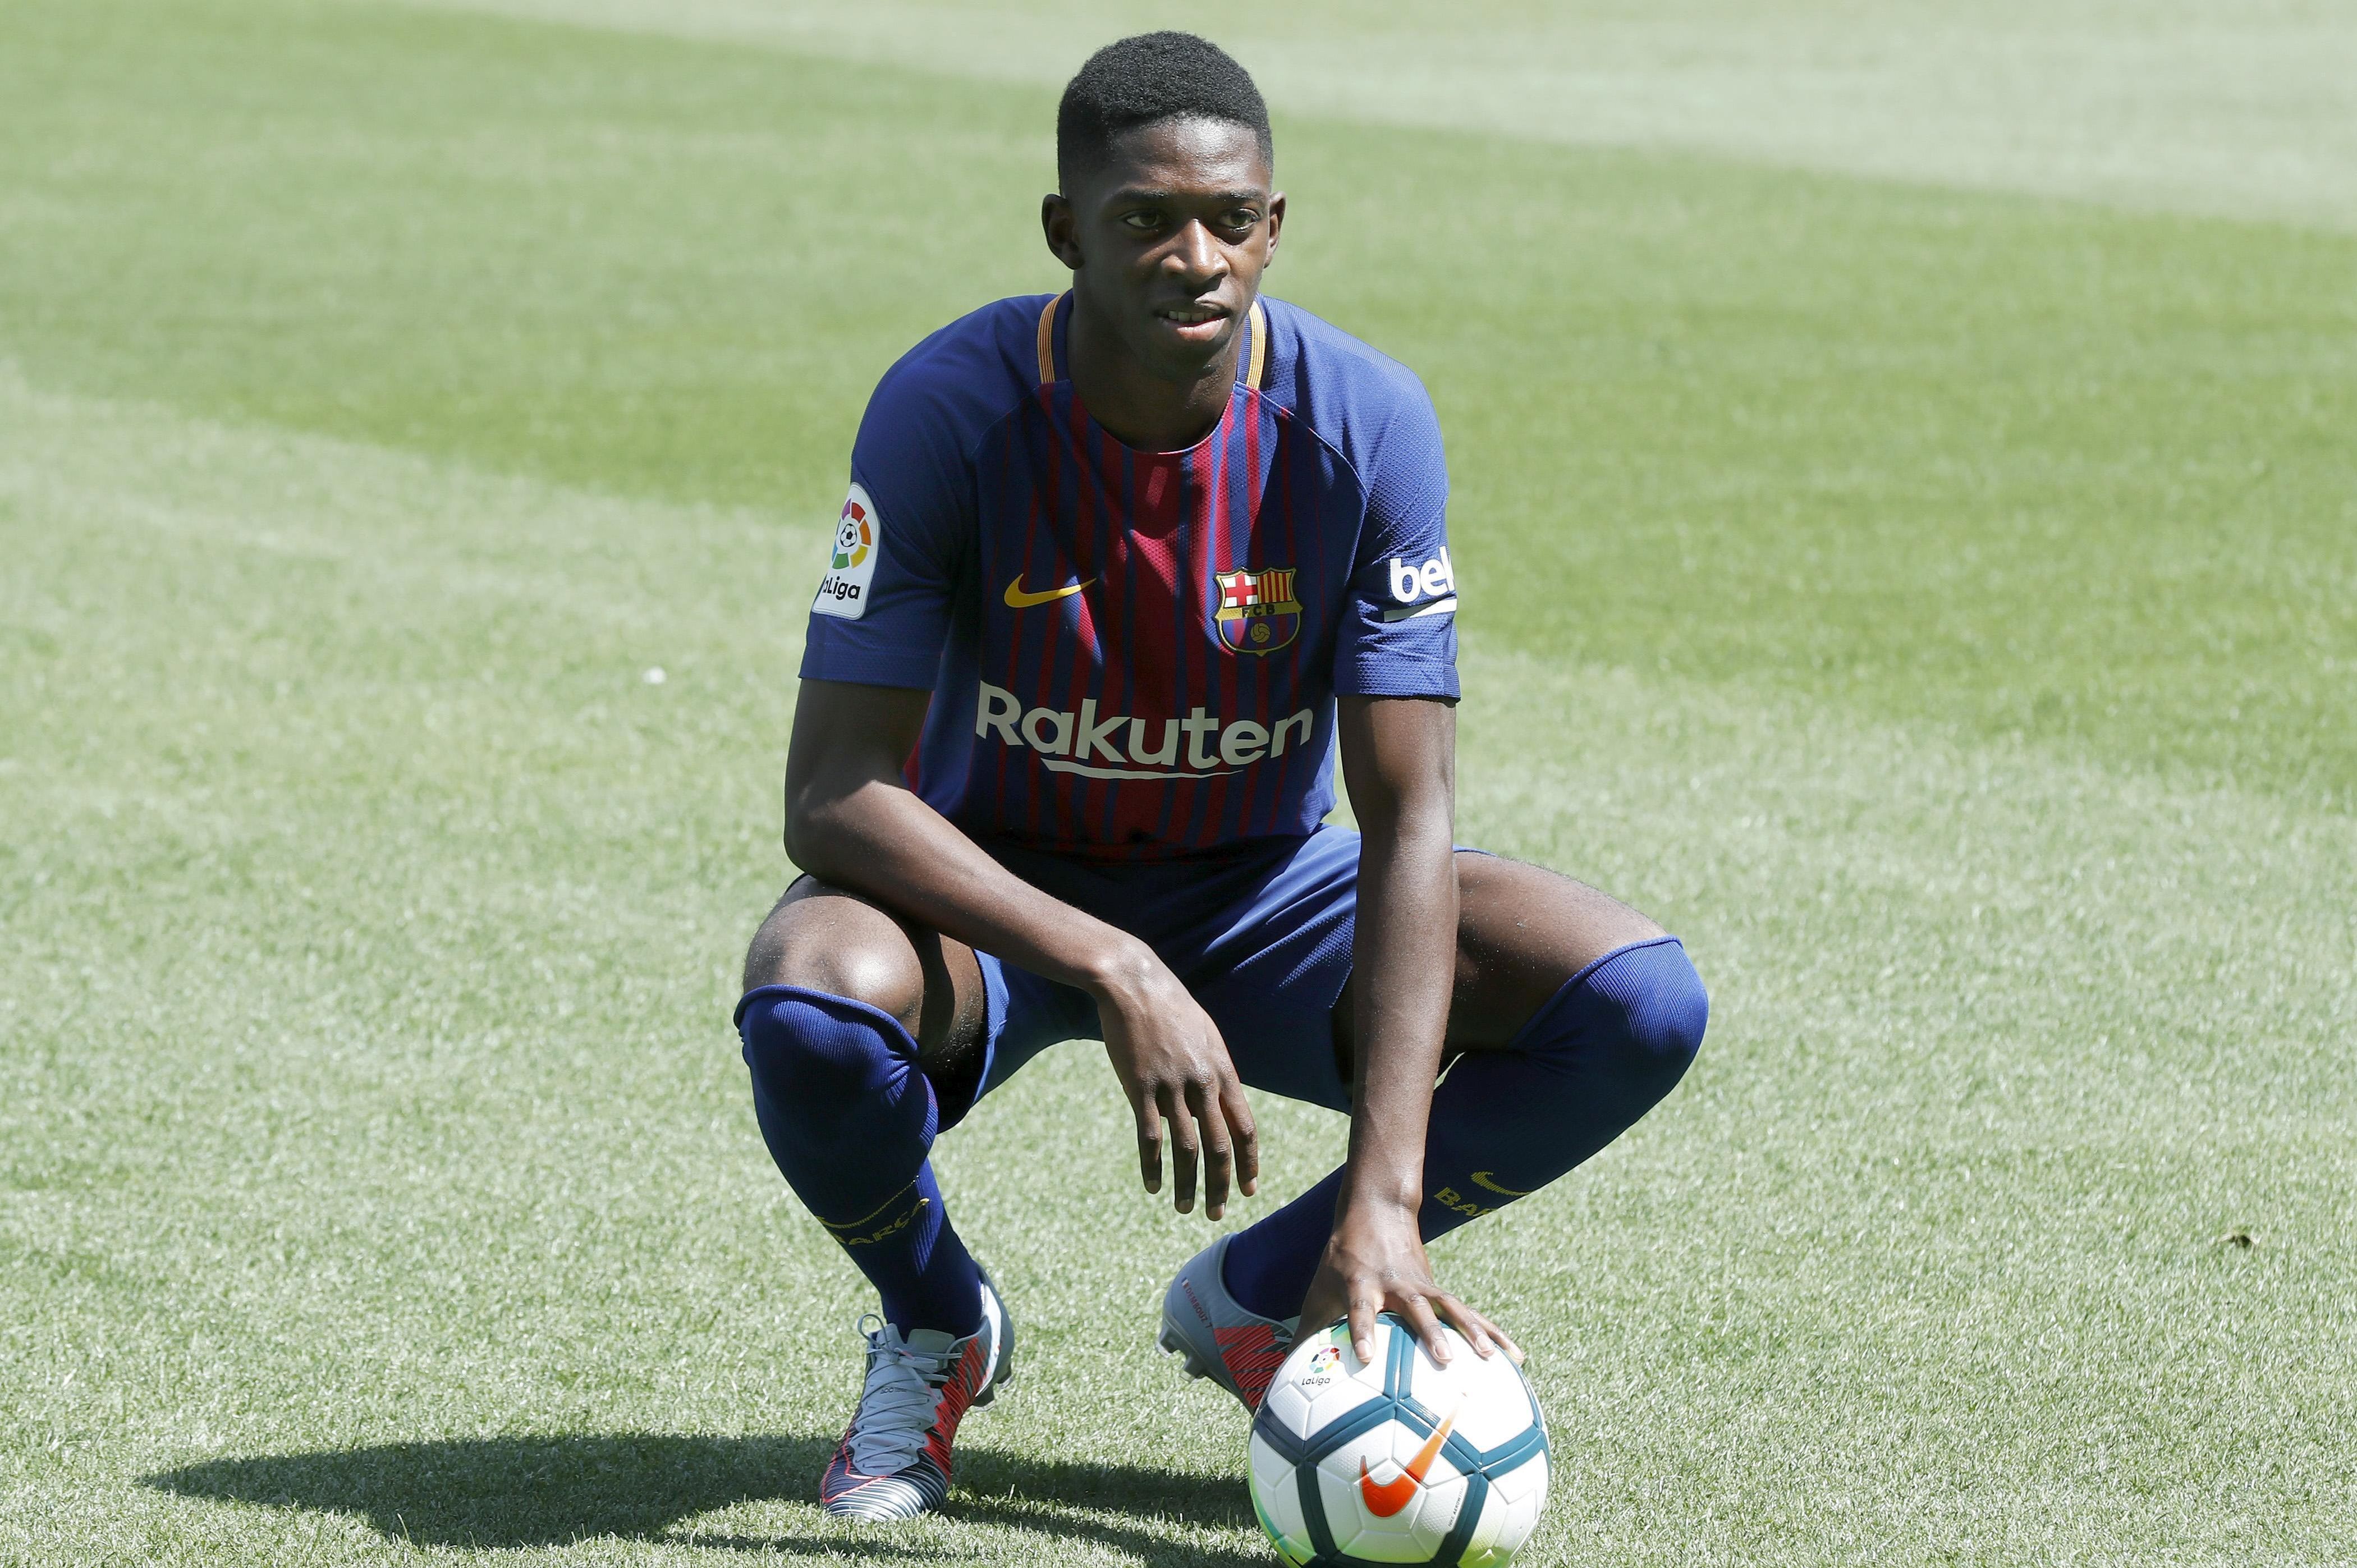 epa06168366 Barcelona's FC new player, French Ousmane Dembele, poses during his presentation at Camp Nou stadium in Barcelona, Spain, 28 August 2017. Dembele, from Borussia Dortmund, signed a 105-million euro contract for next five seasons.  EPA/ANDREU DALMAU